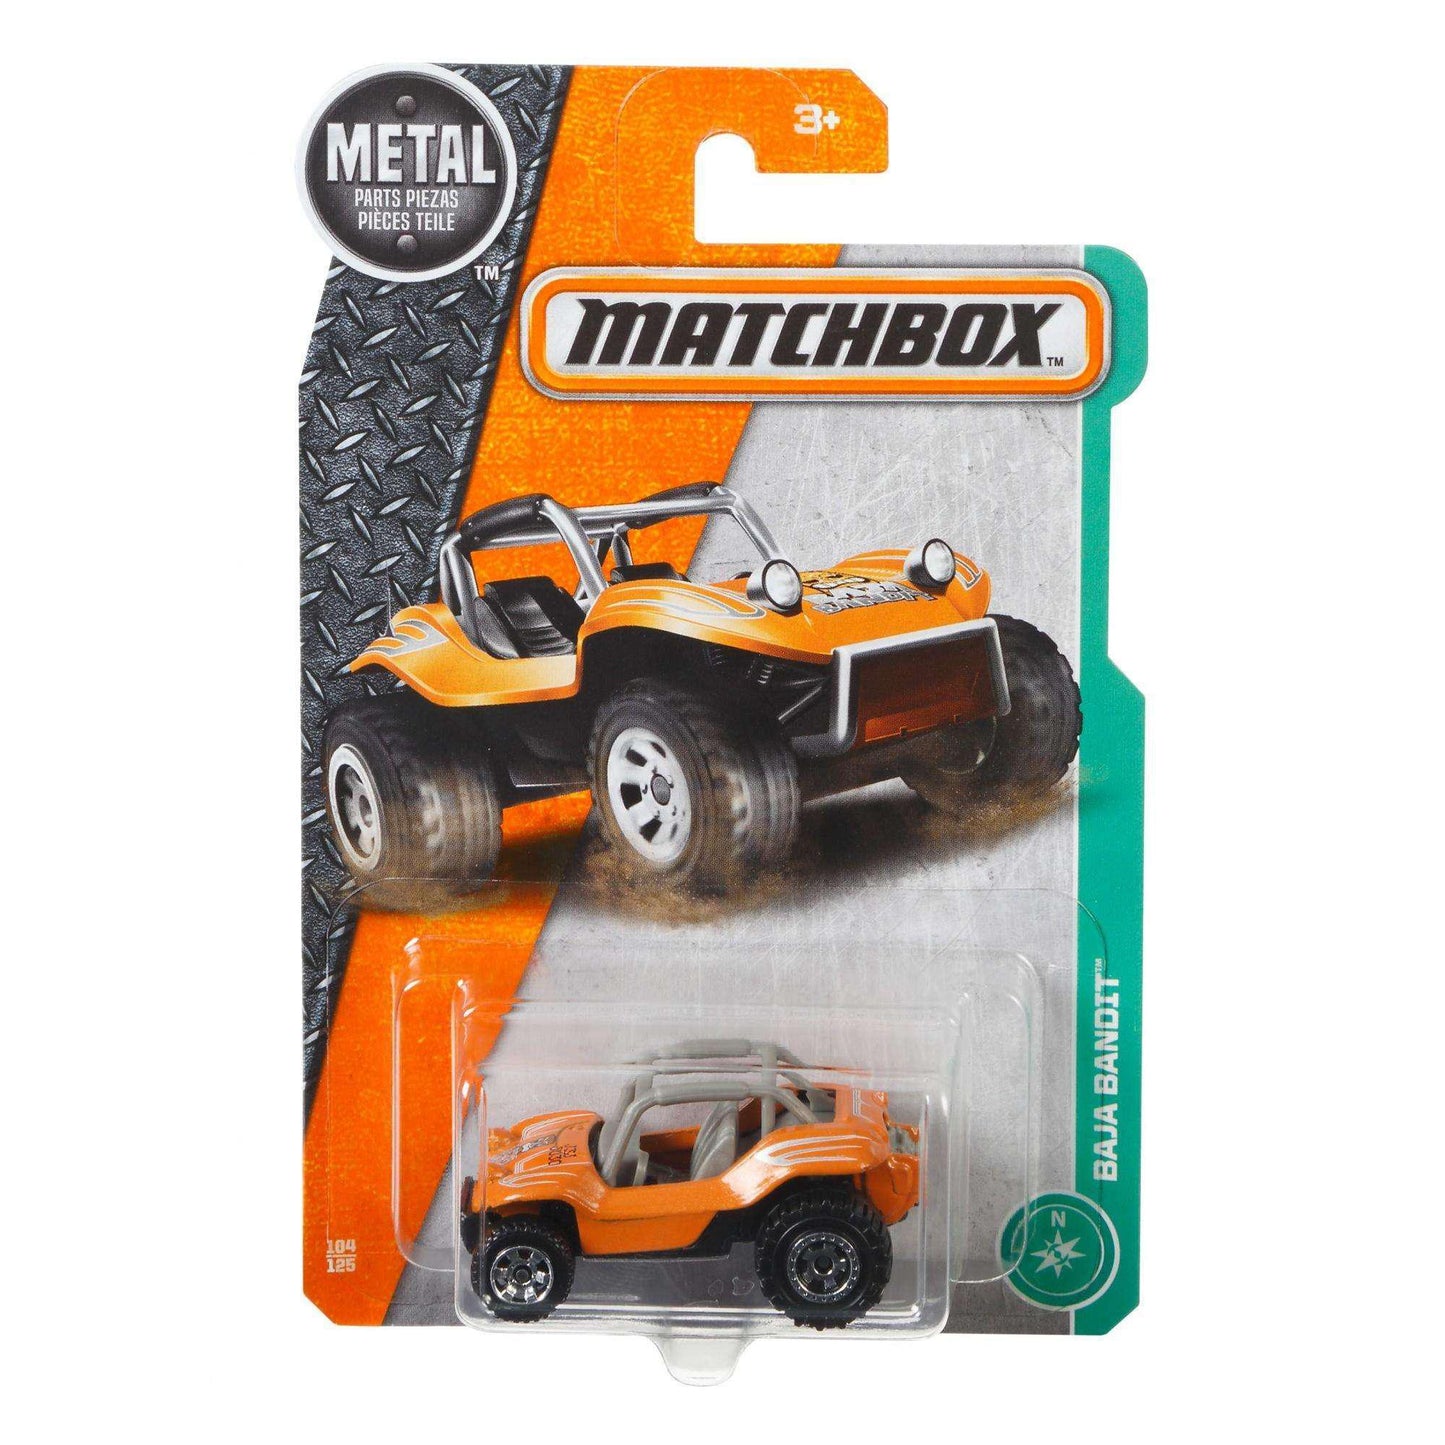 Matchbox 1:64 Scale Collectible Die-Cast Car - Great Gift For Any Car Fan (Styles May Vary)